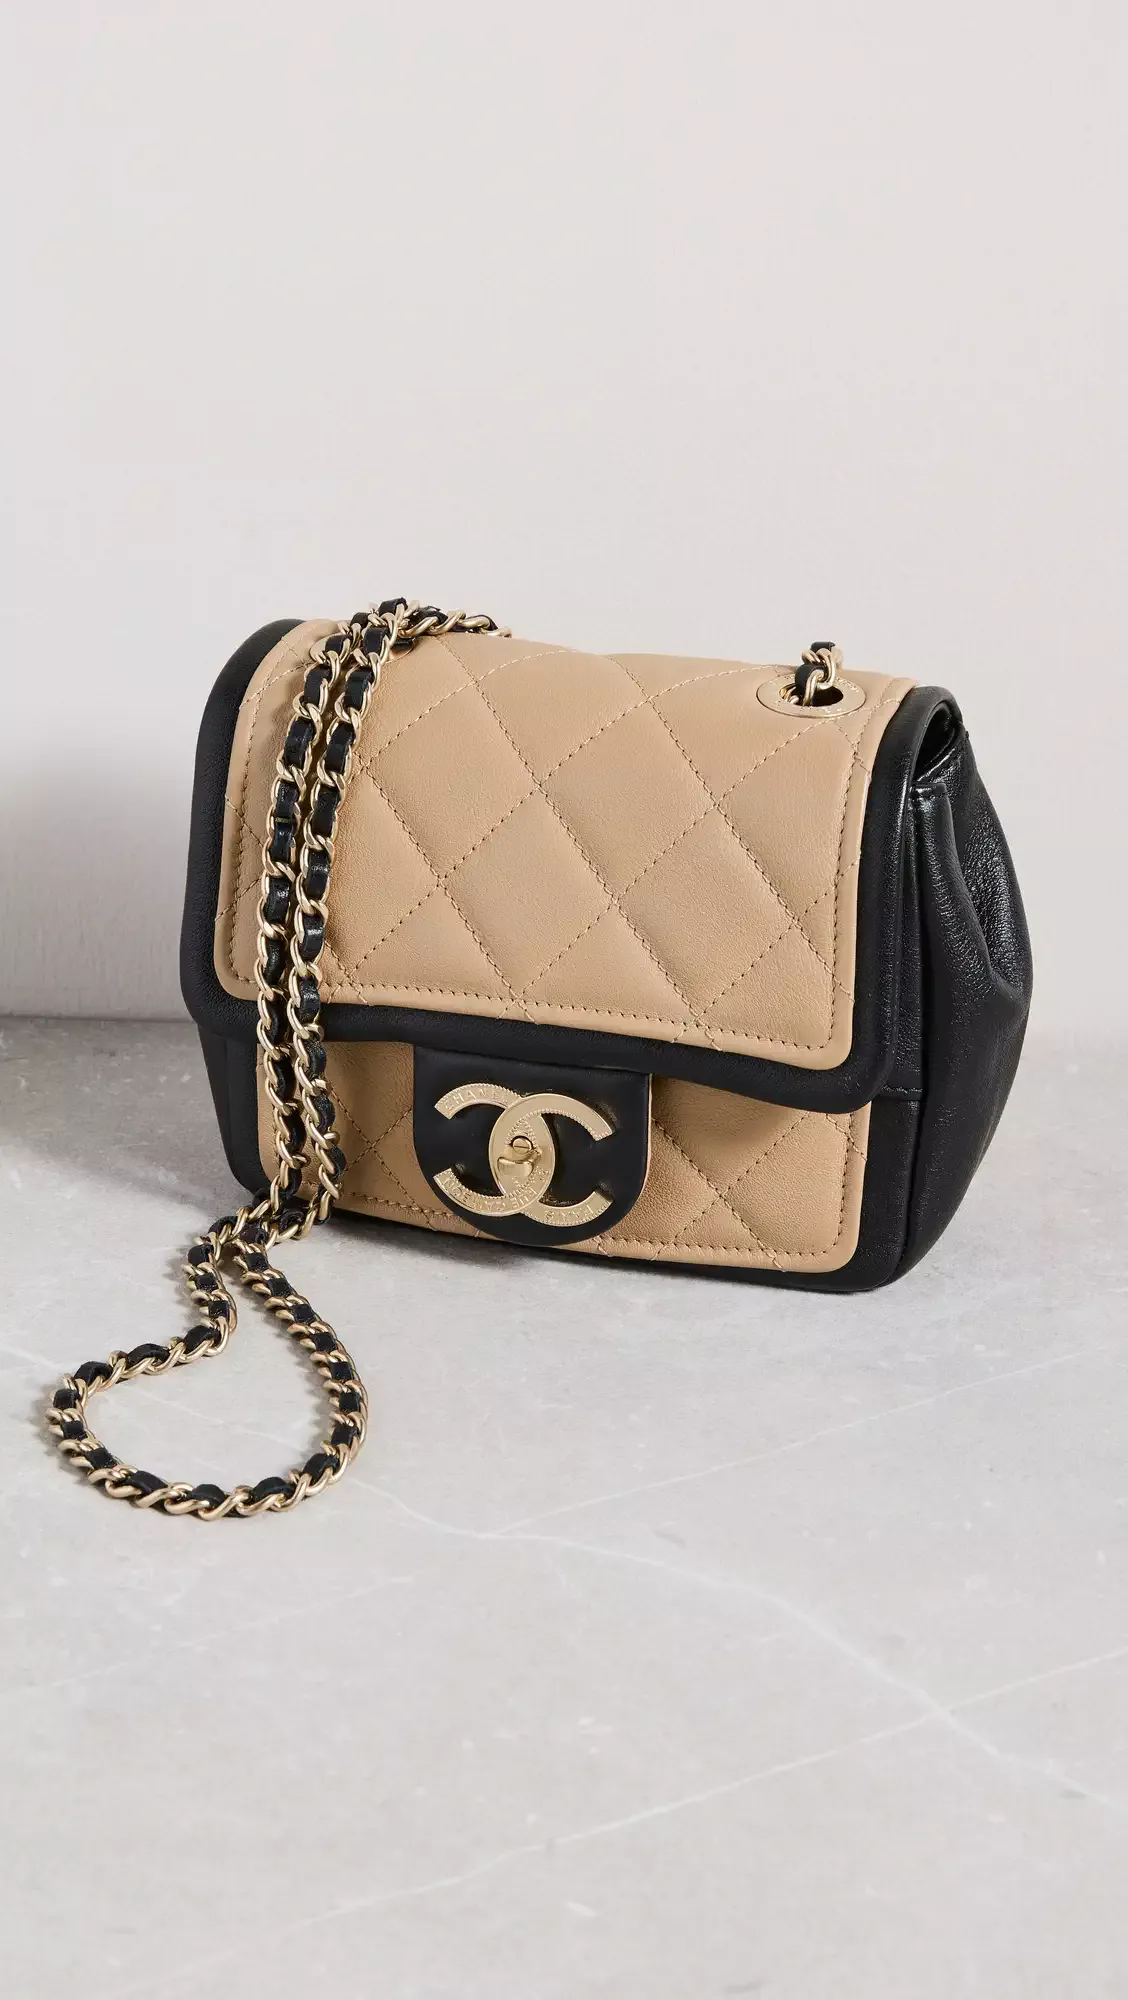 What Goes Around Comes Around Chanel Red Calfskin Flap Bag